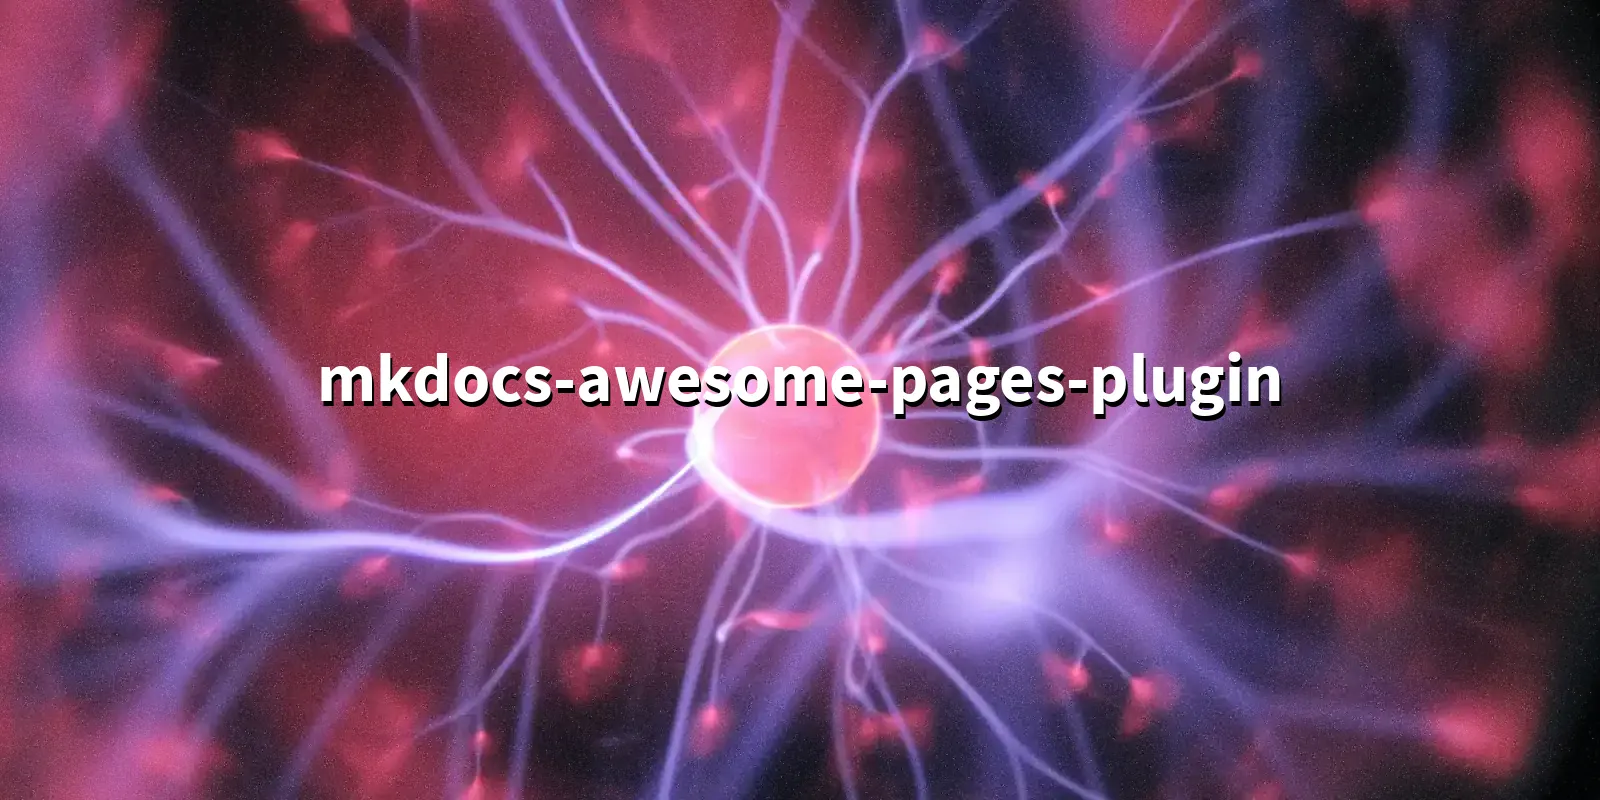 /pkg/m/mkdocs-awesome-pages-plugin/mkdocs-awesome-pages-plugin-banner.webp